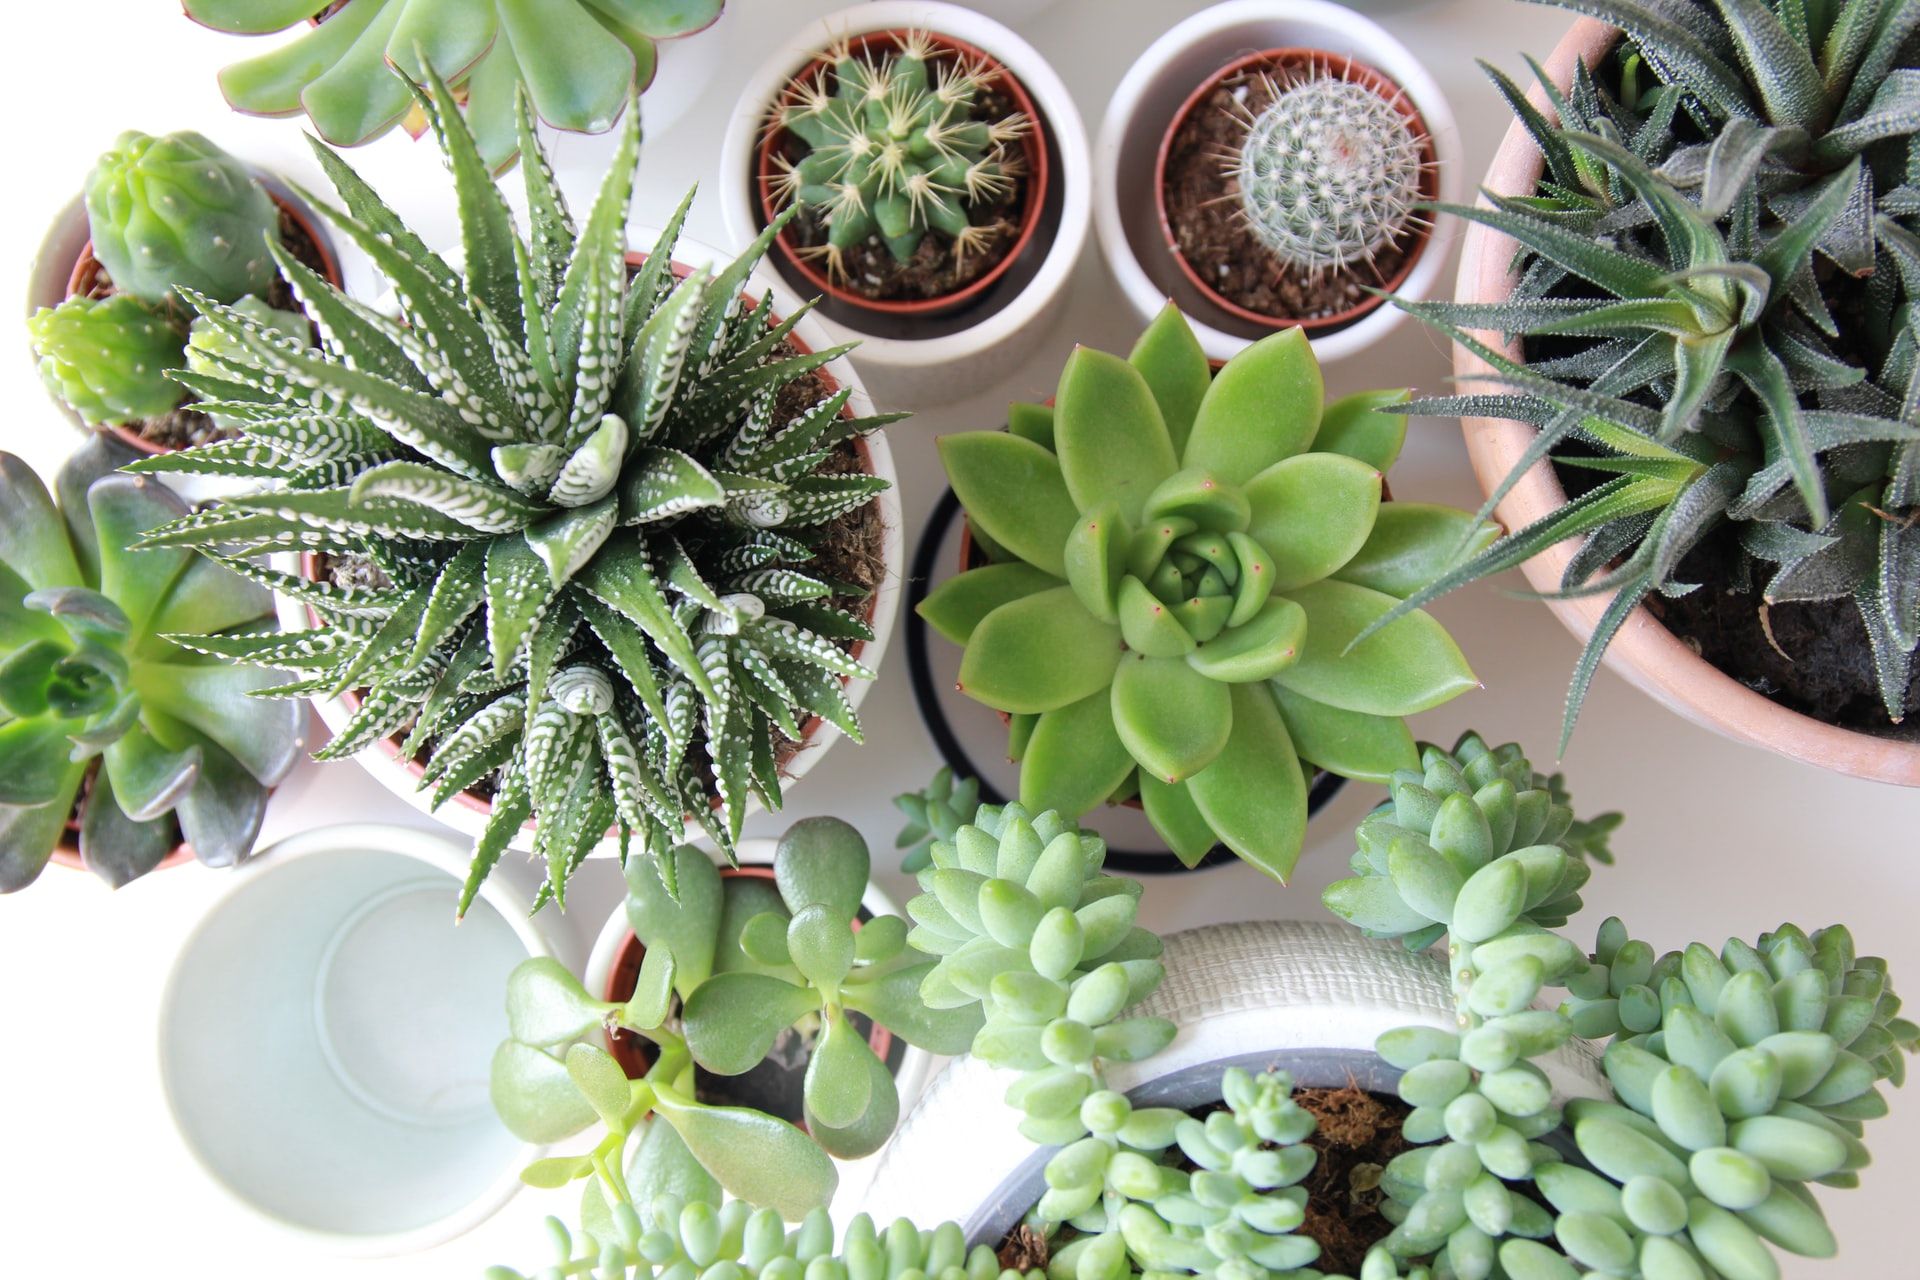 Variety of succulent houseplants